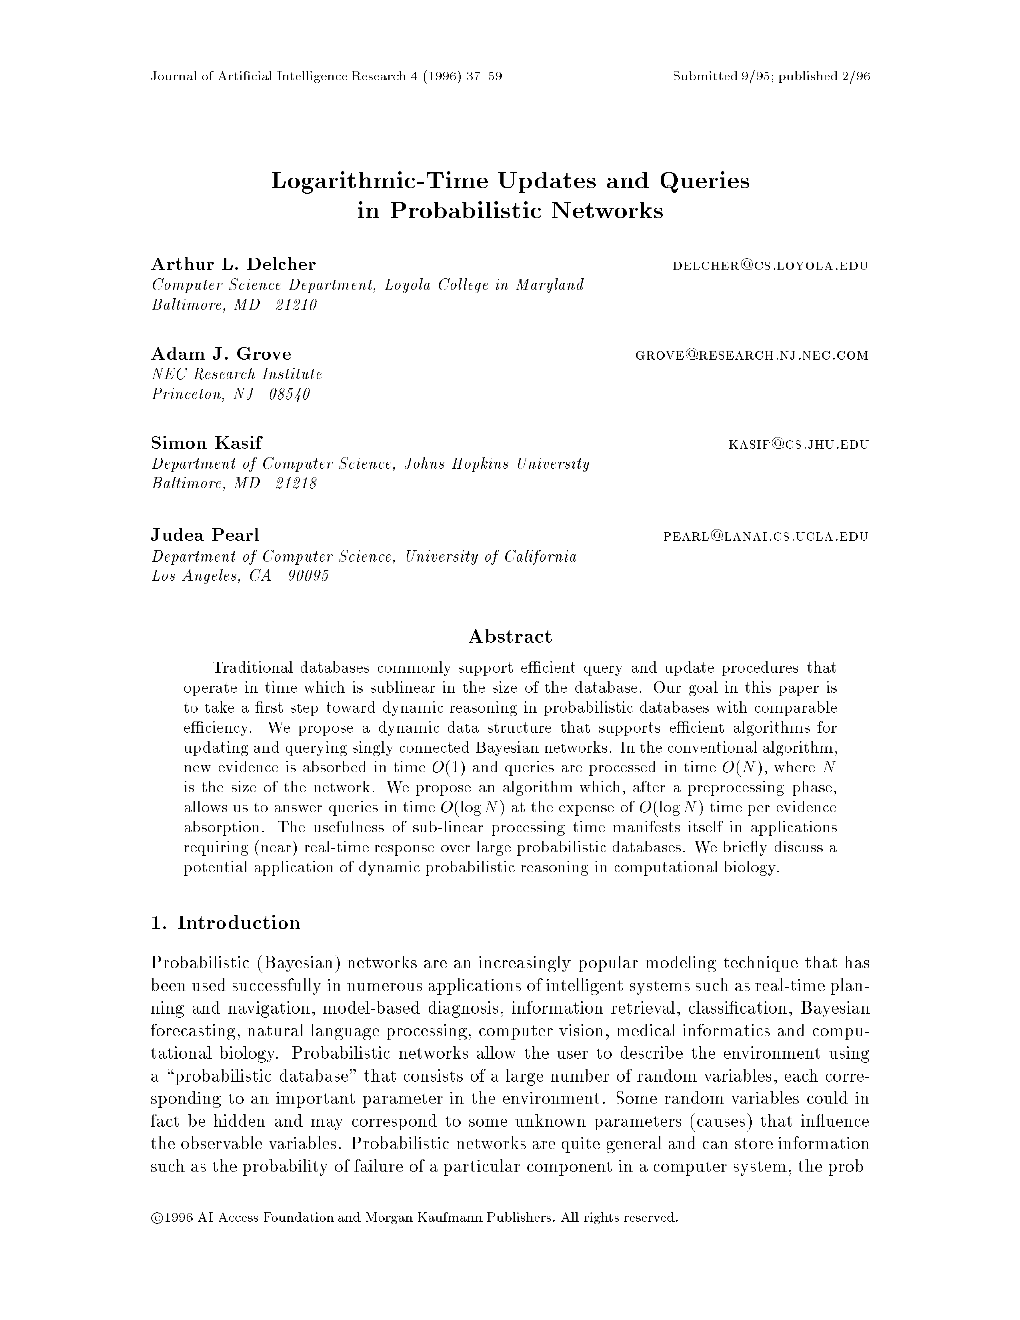 Logarithmic-Time Updates and Queries in Probabilistic Networks